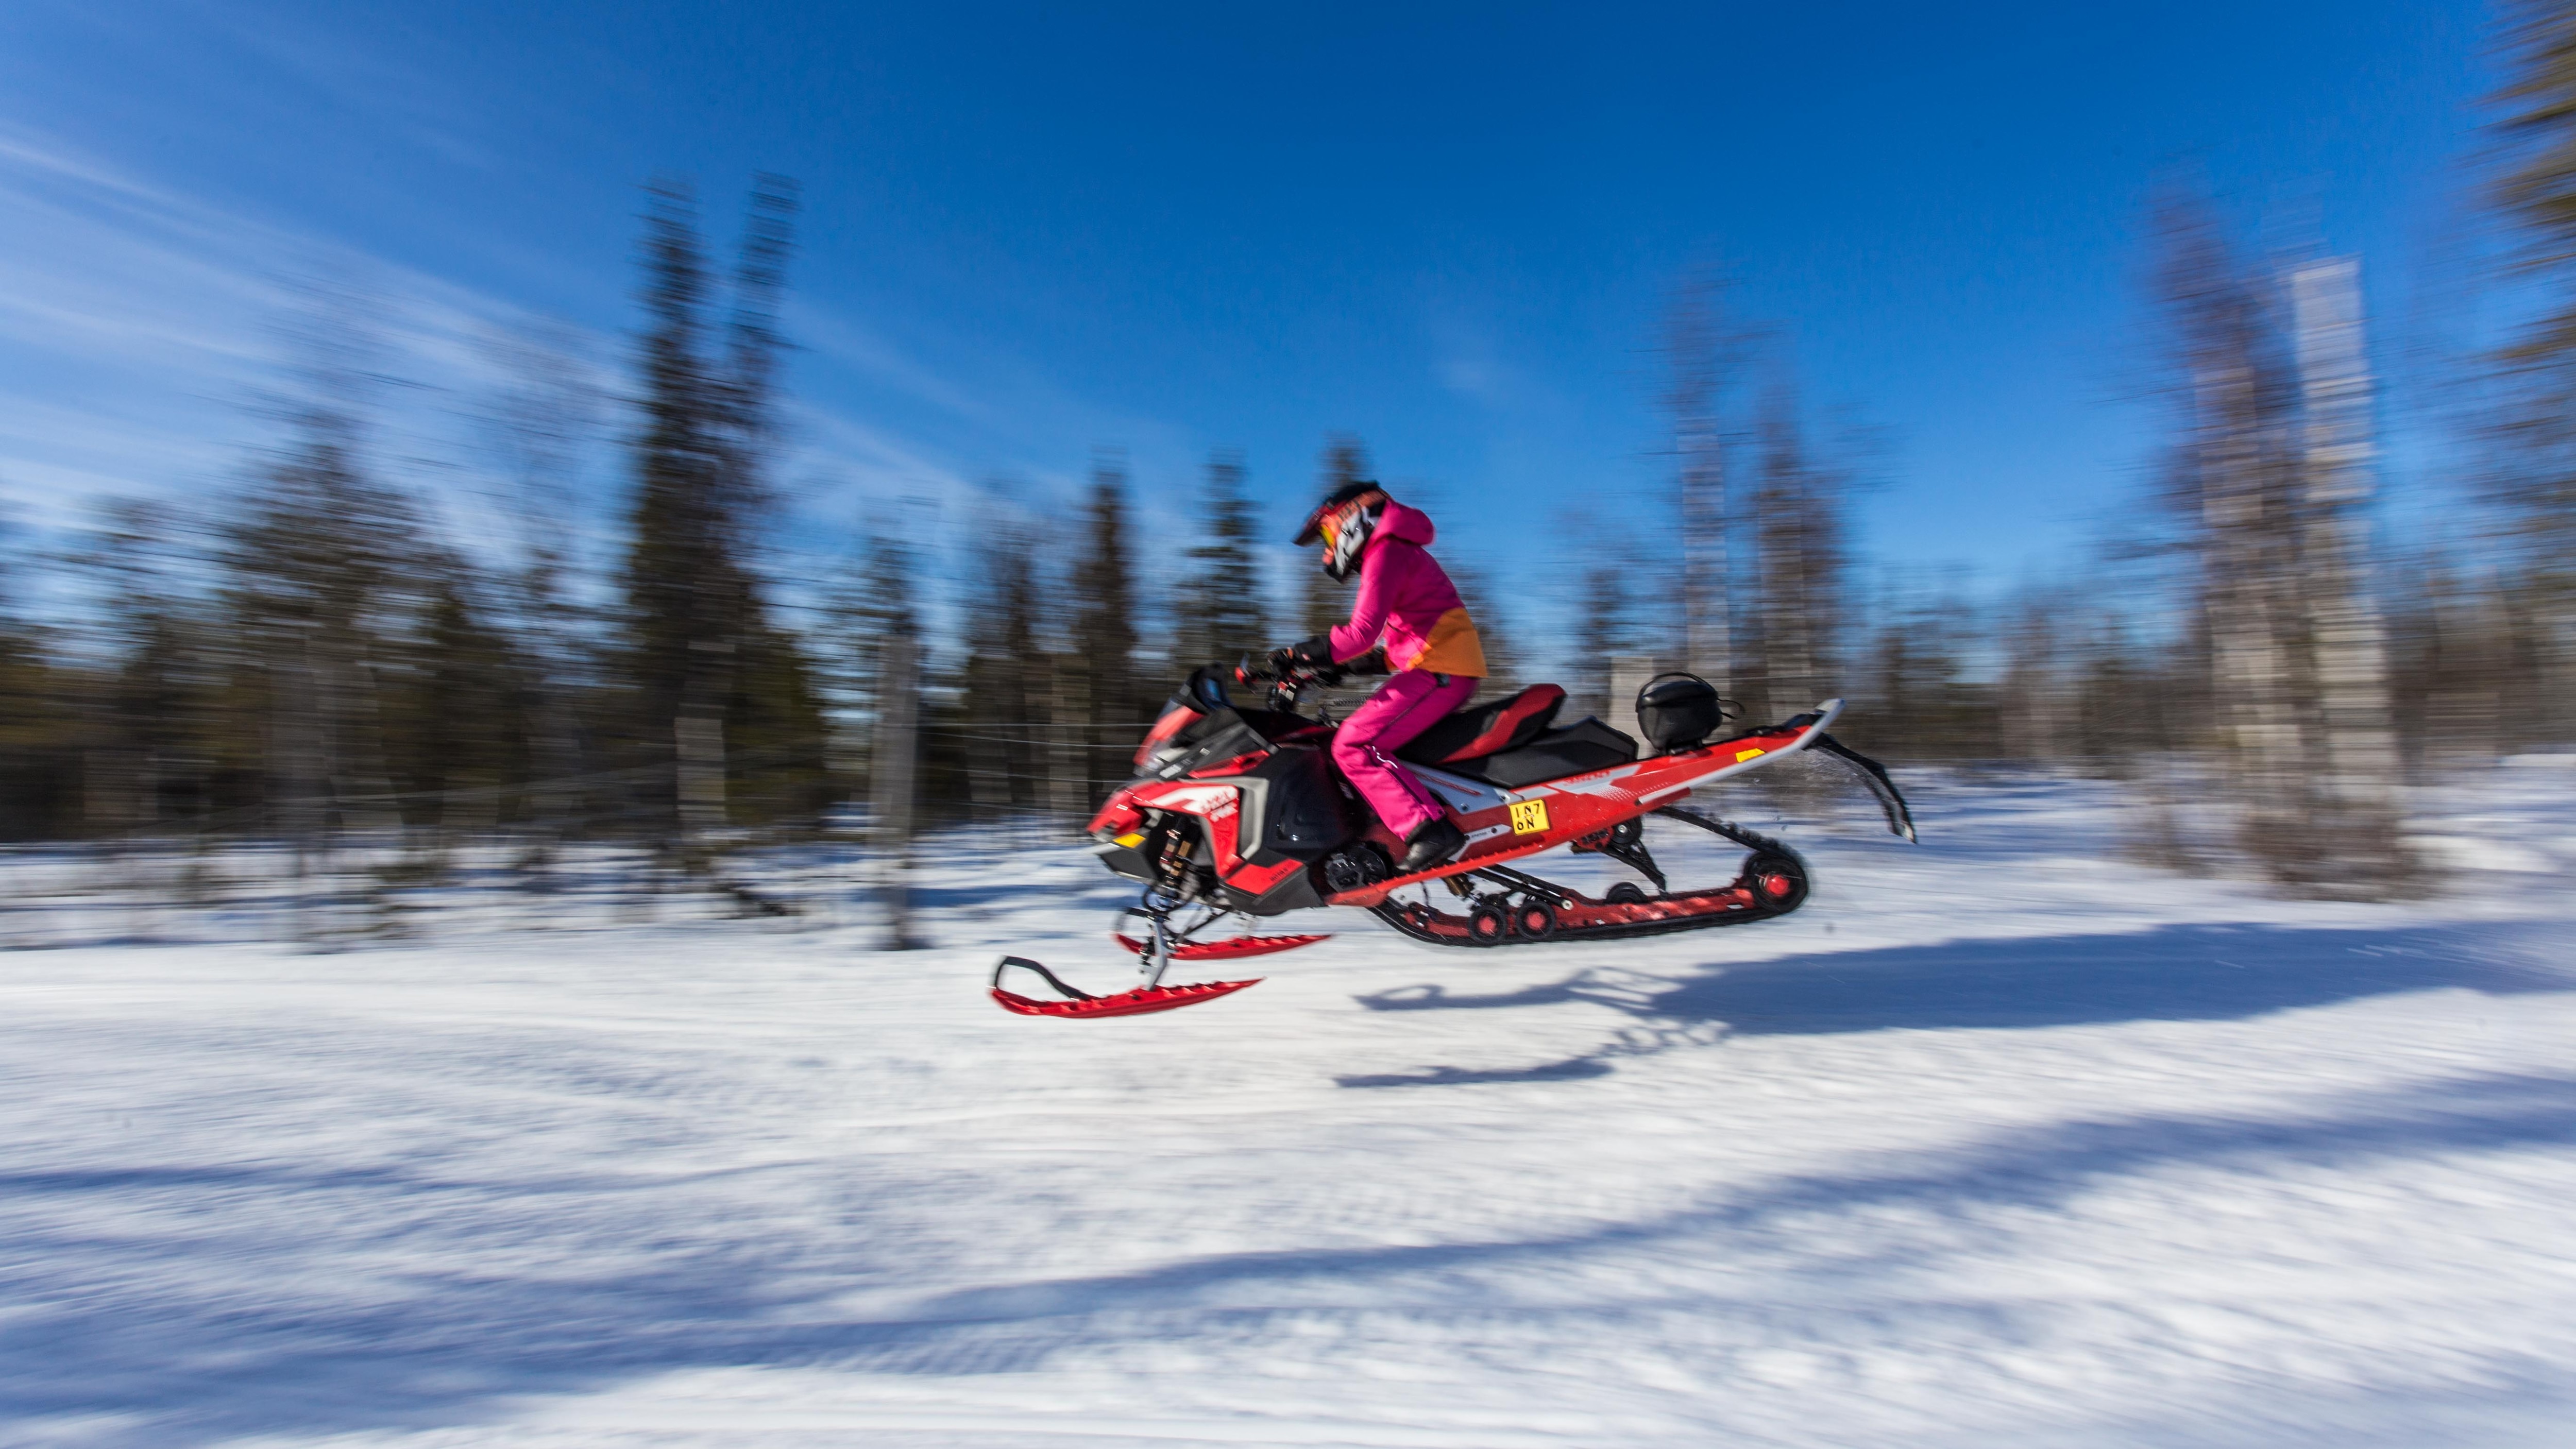 Finnish formula driver Emma Kimiläinen rides with Lynx Rave RE 850 2022 snowmobile on trail